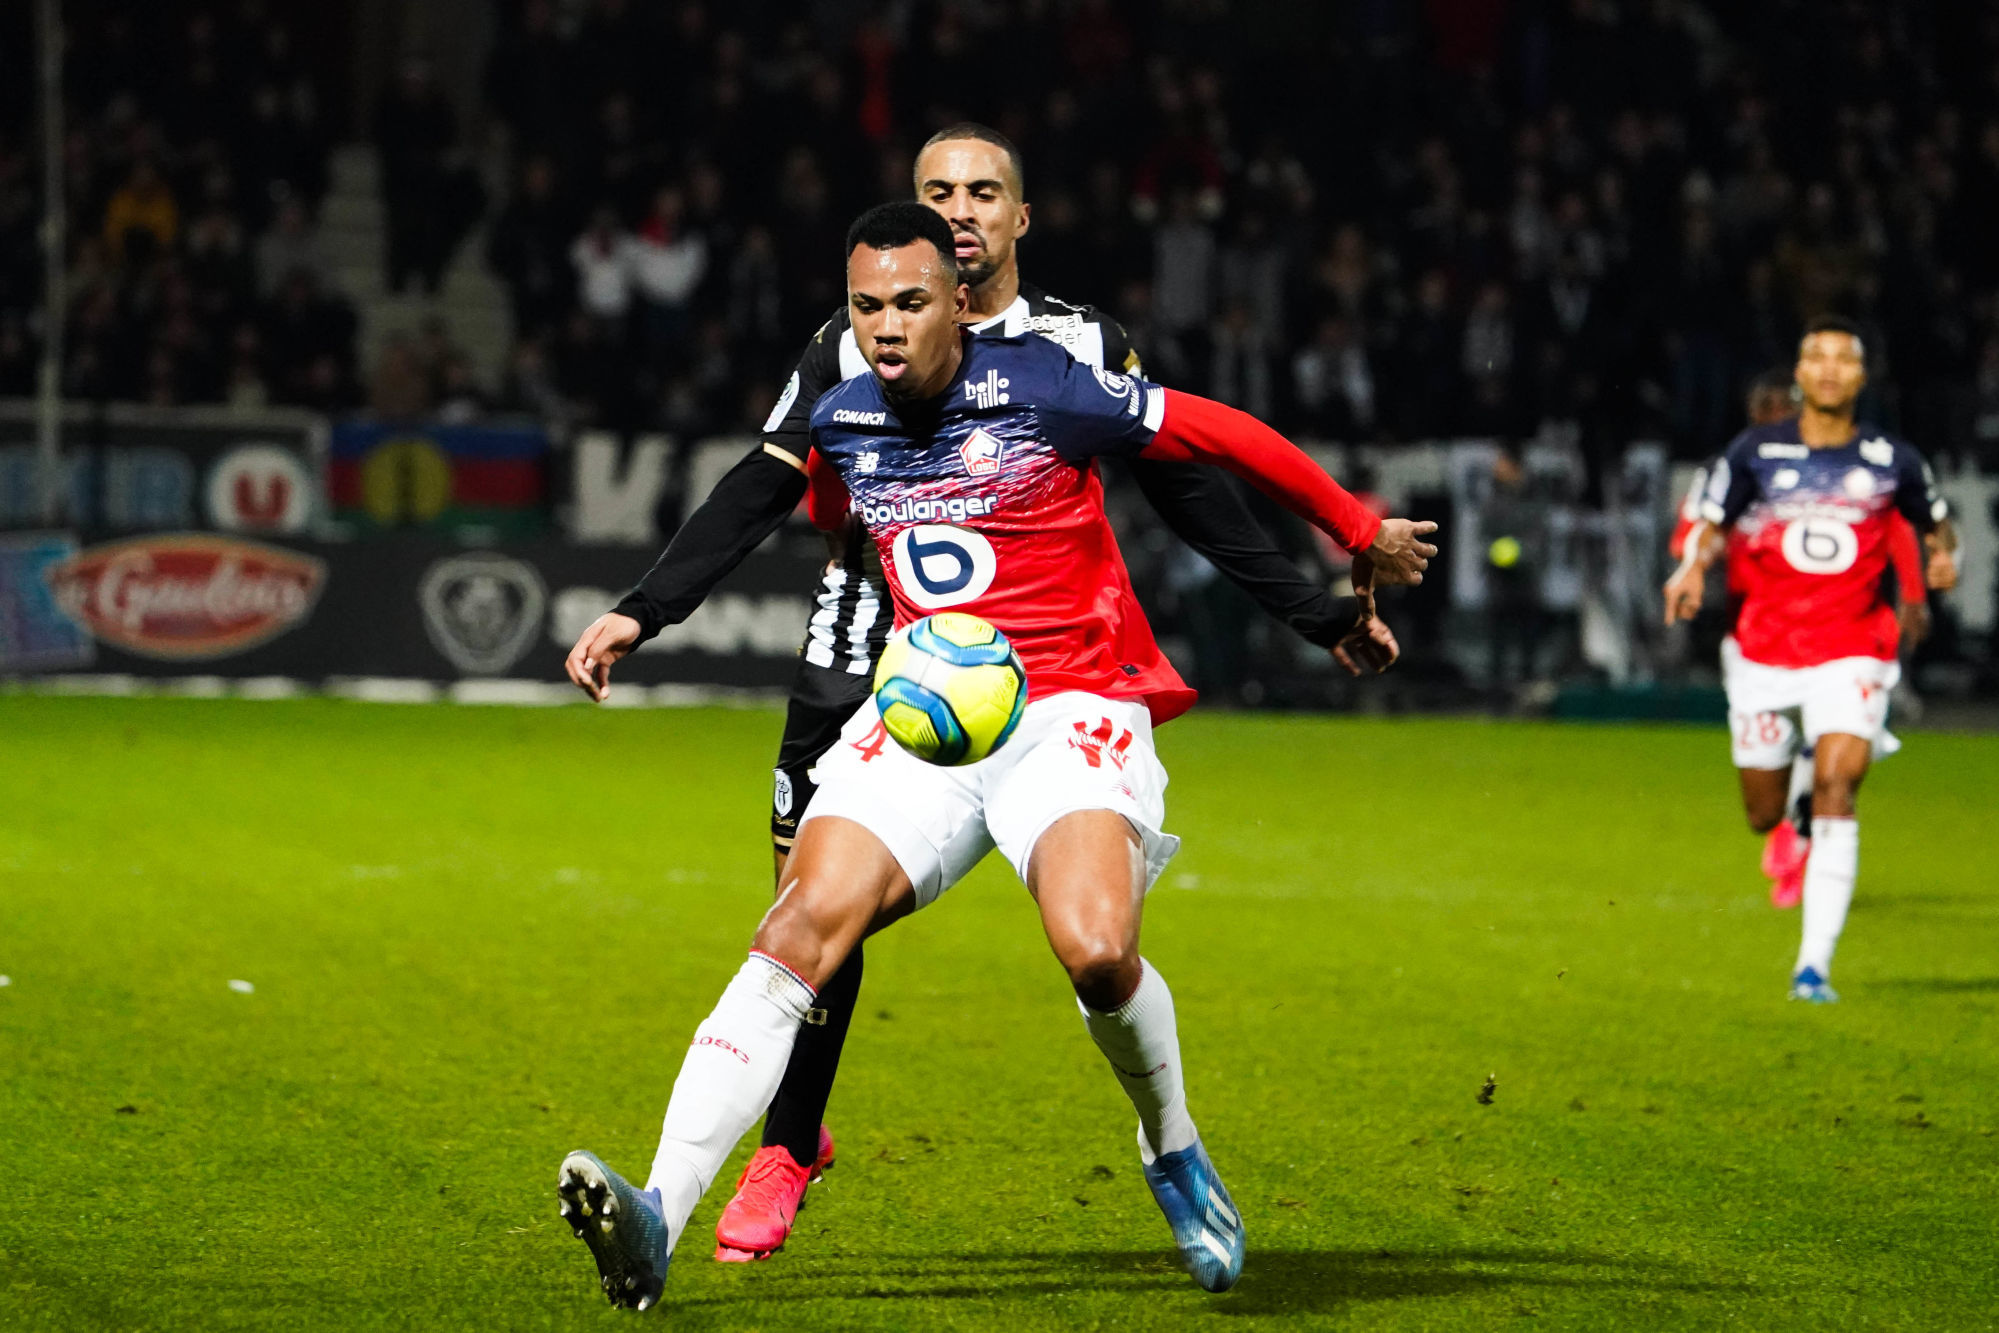 GABRIEL of Lille and Rachid ALIOUI of Angers during the Ligue 1 match between Angers SCO and Lille OSC at Stade Raymond Kopa on February 7, 2020 in Angers, France. (Photo by Eddy Lemaistre/Icon Sport) - Stade Raymond Kopa - Angers (France)